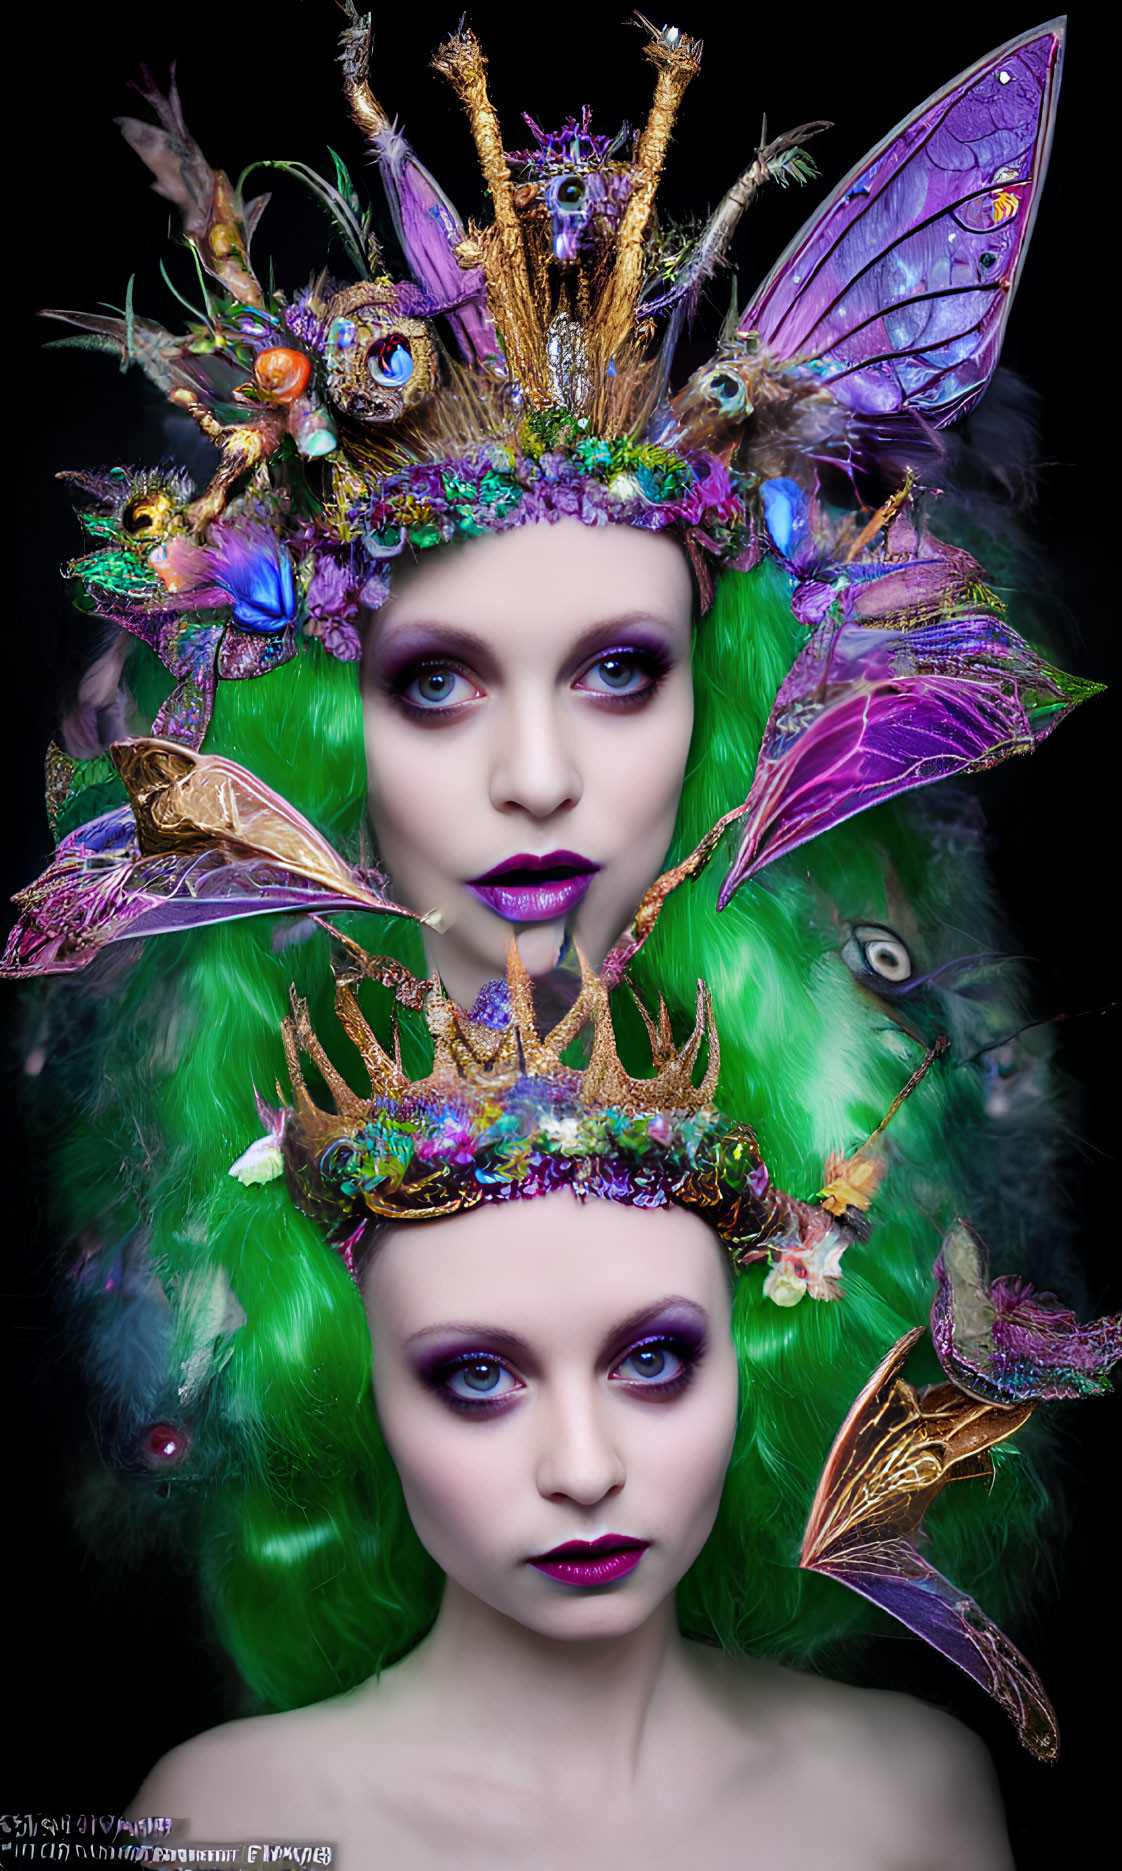 Two women in fantasy makeup with green hair and nature-themed crowns on black background